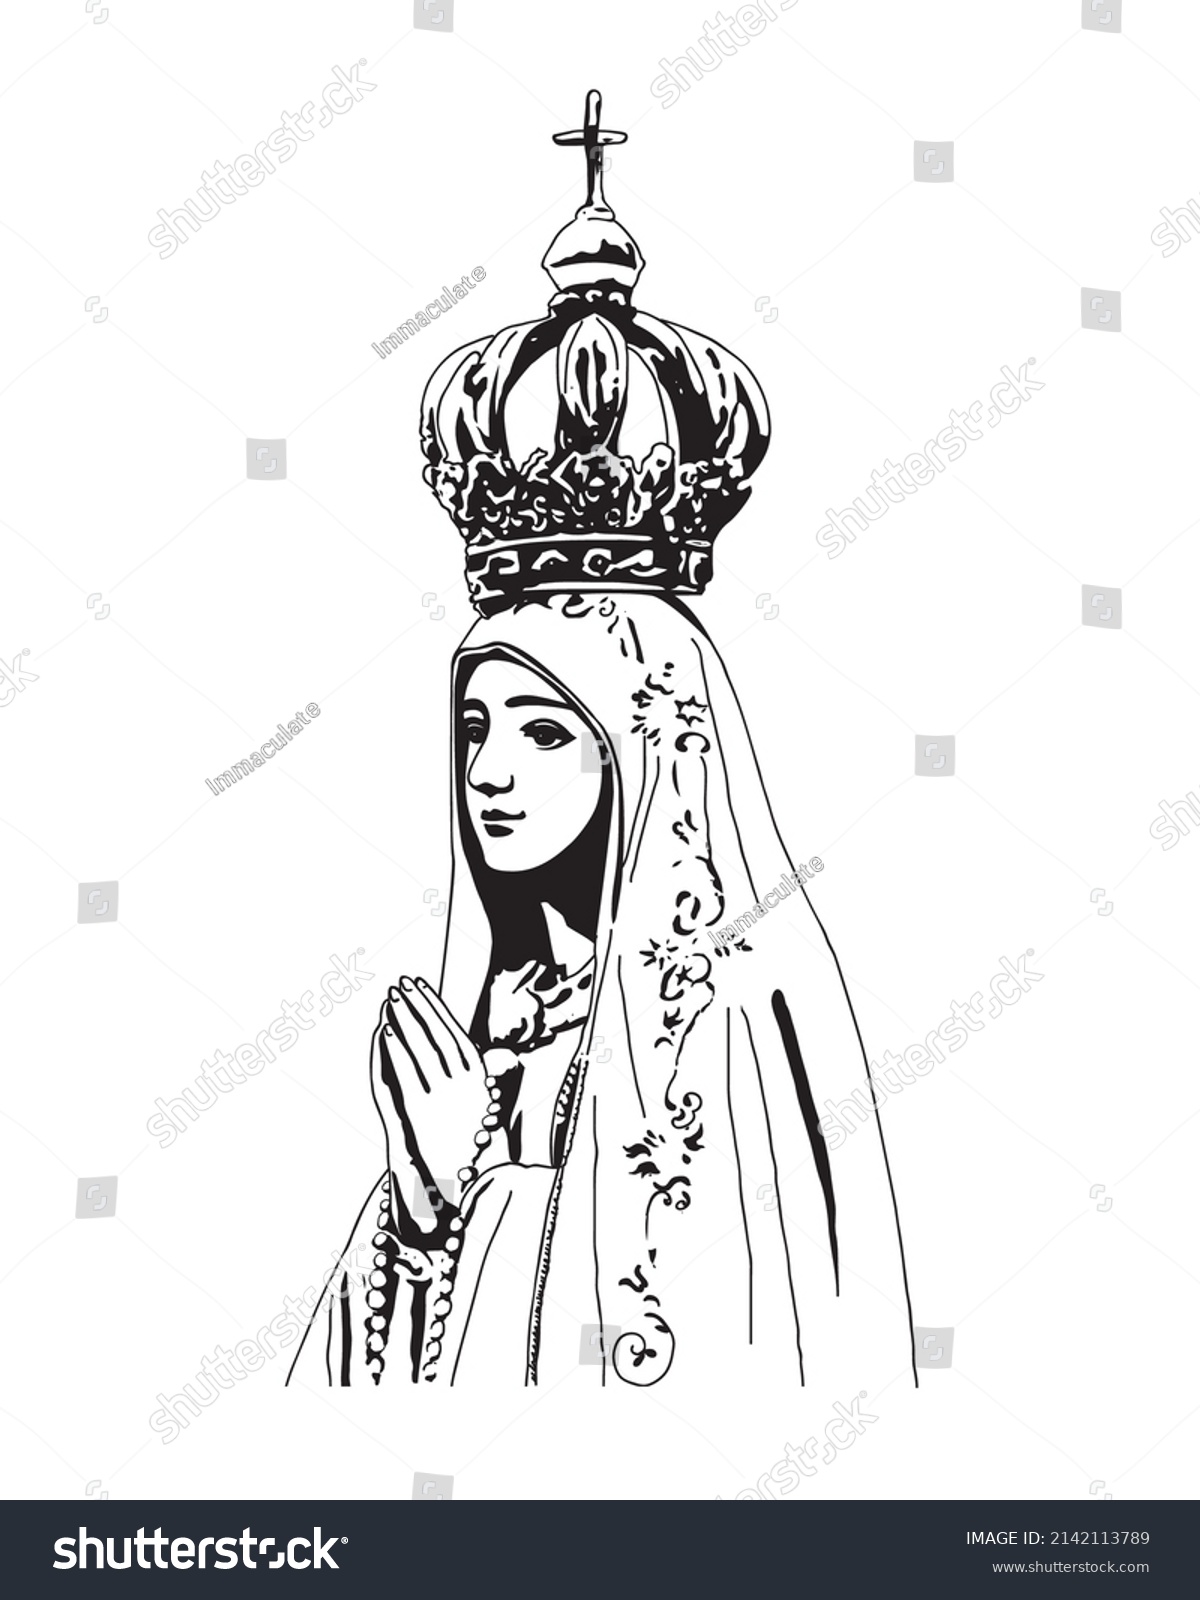 Our Lady of Fatima Illustration Virgin Mary catholic religious vector #2142113789